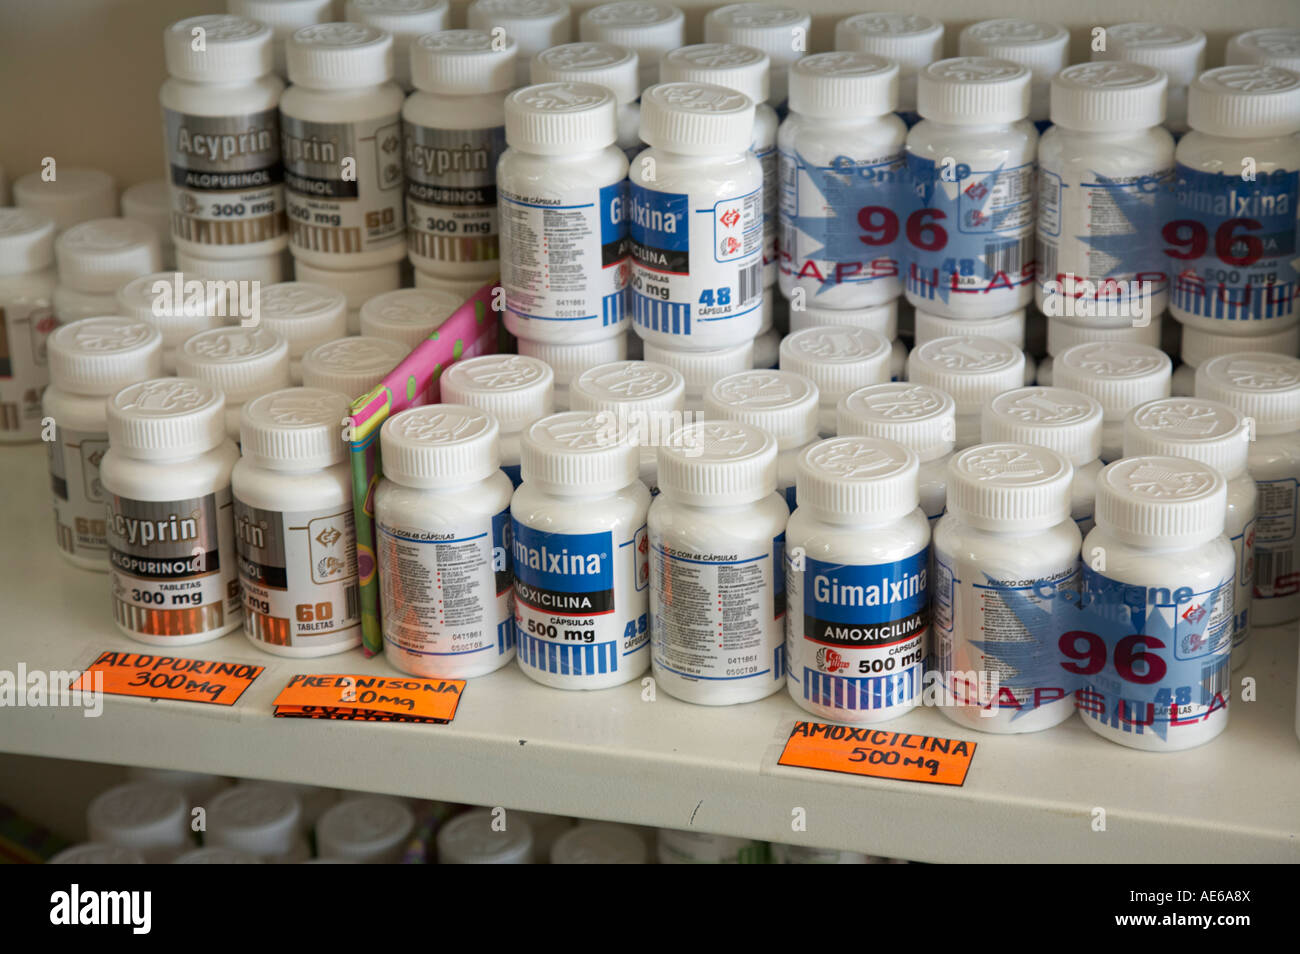 Mexico Pharmacy High Resolution Stock Photography and Images - Alamy